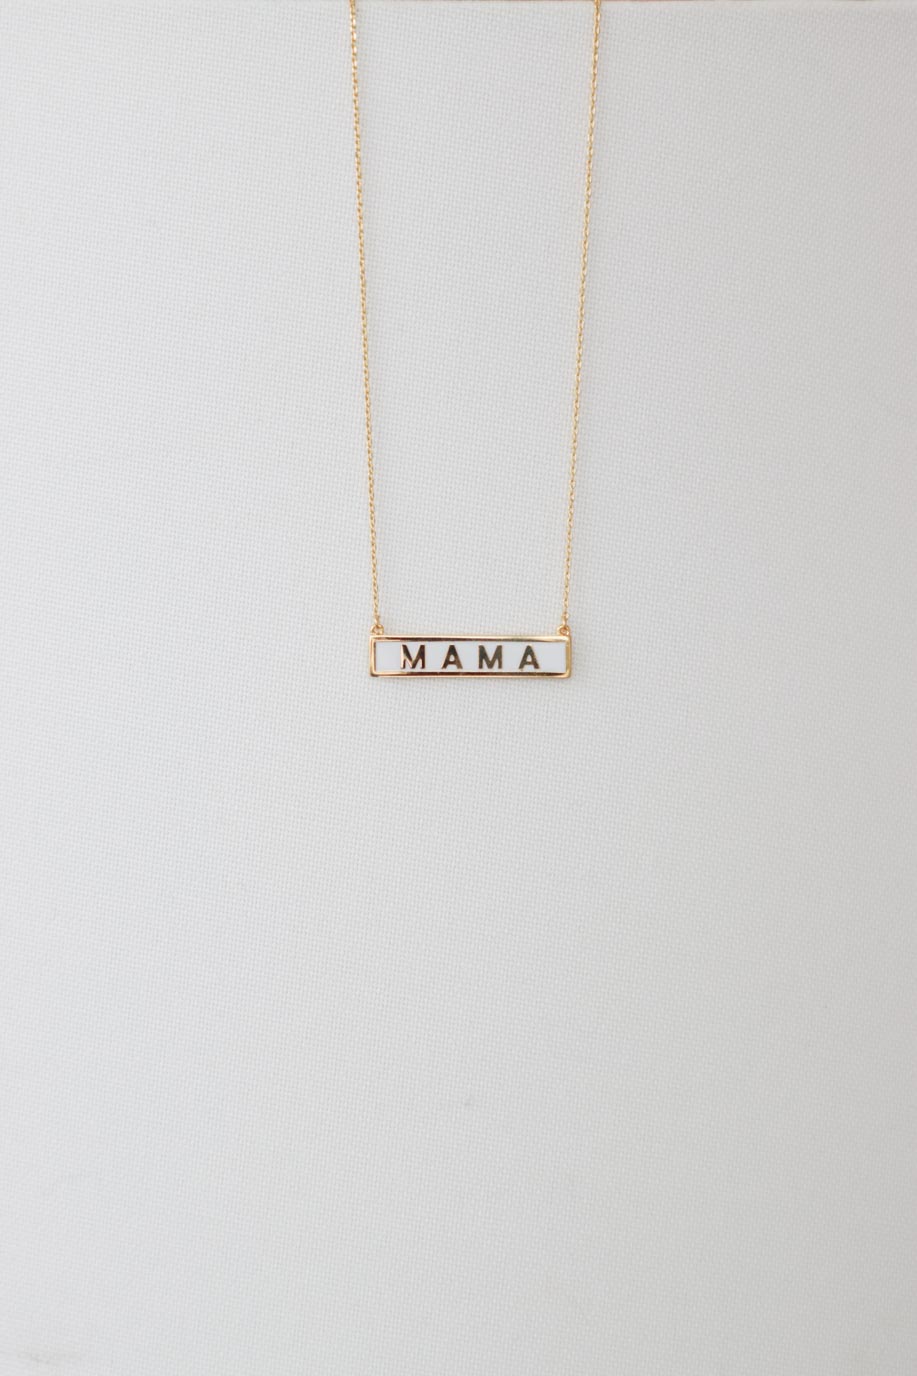 white and gold "mama" necklace